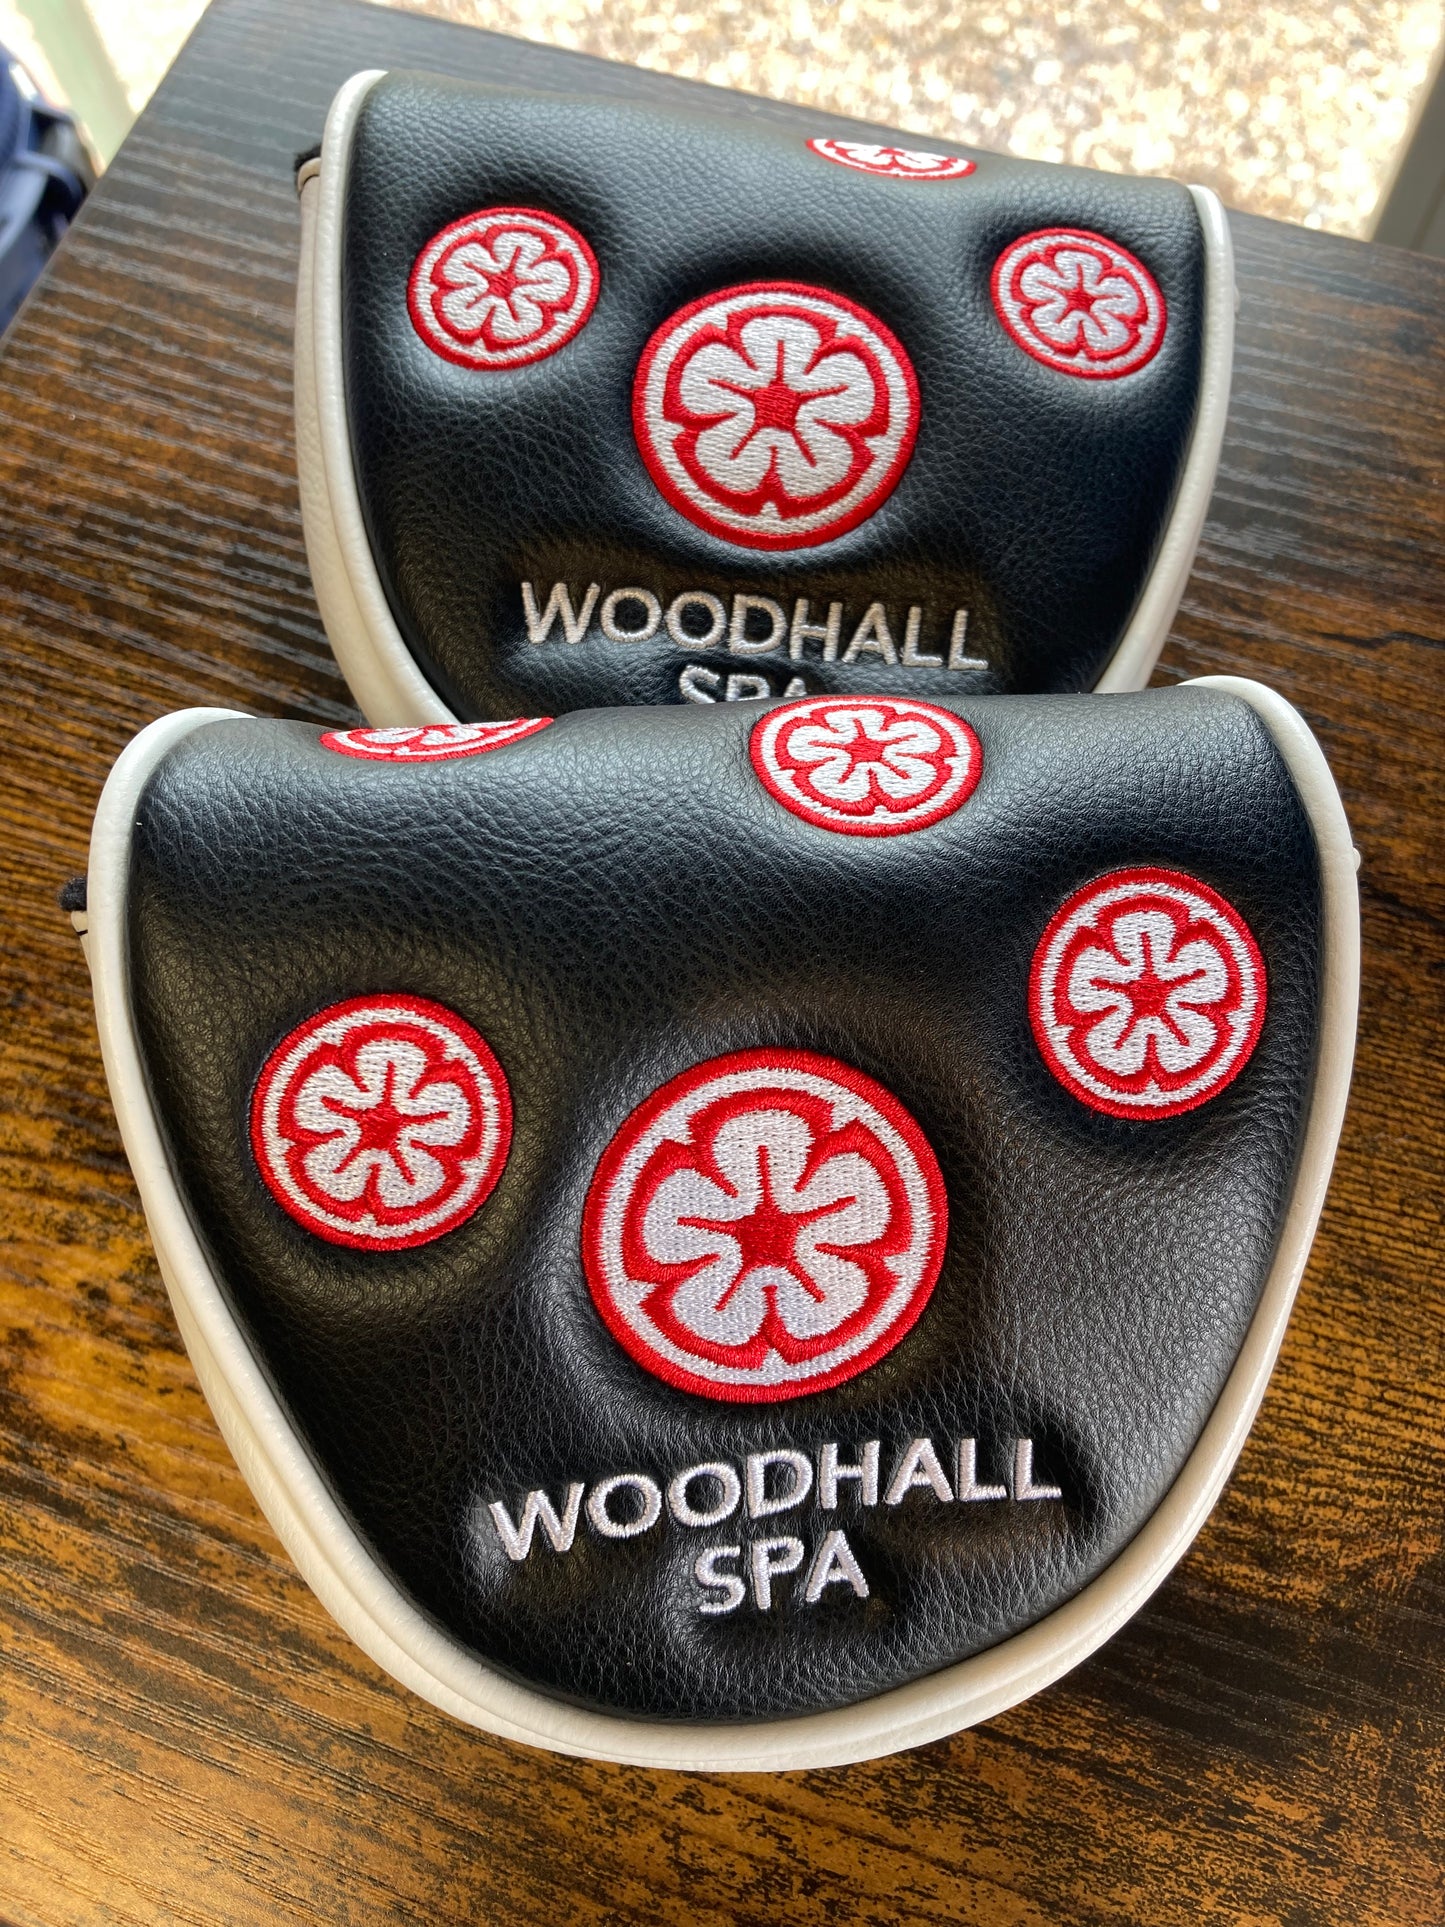 Woodhall Spa PRG Mallet Putter Cover